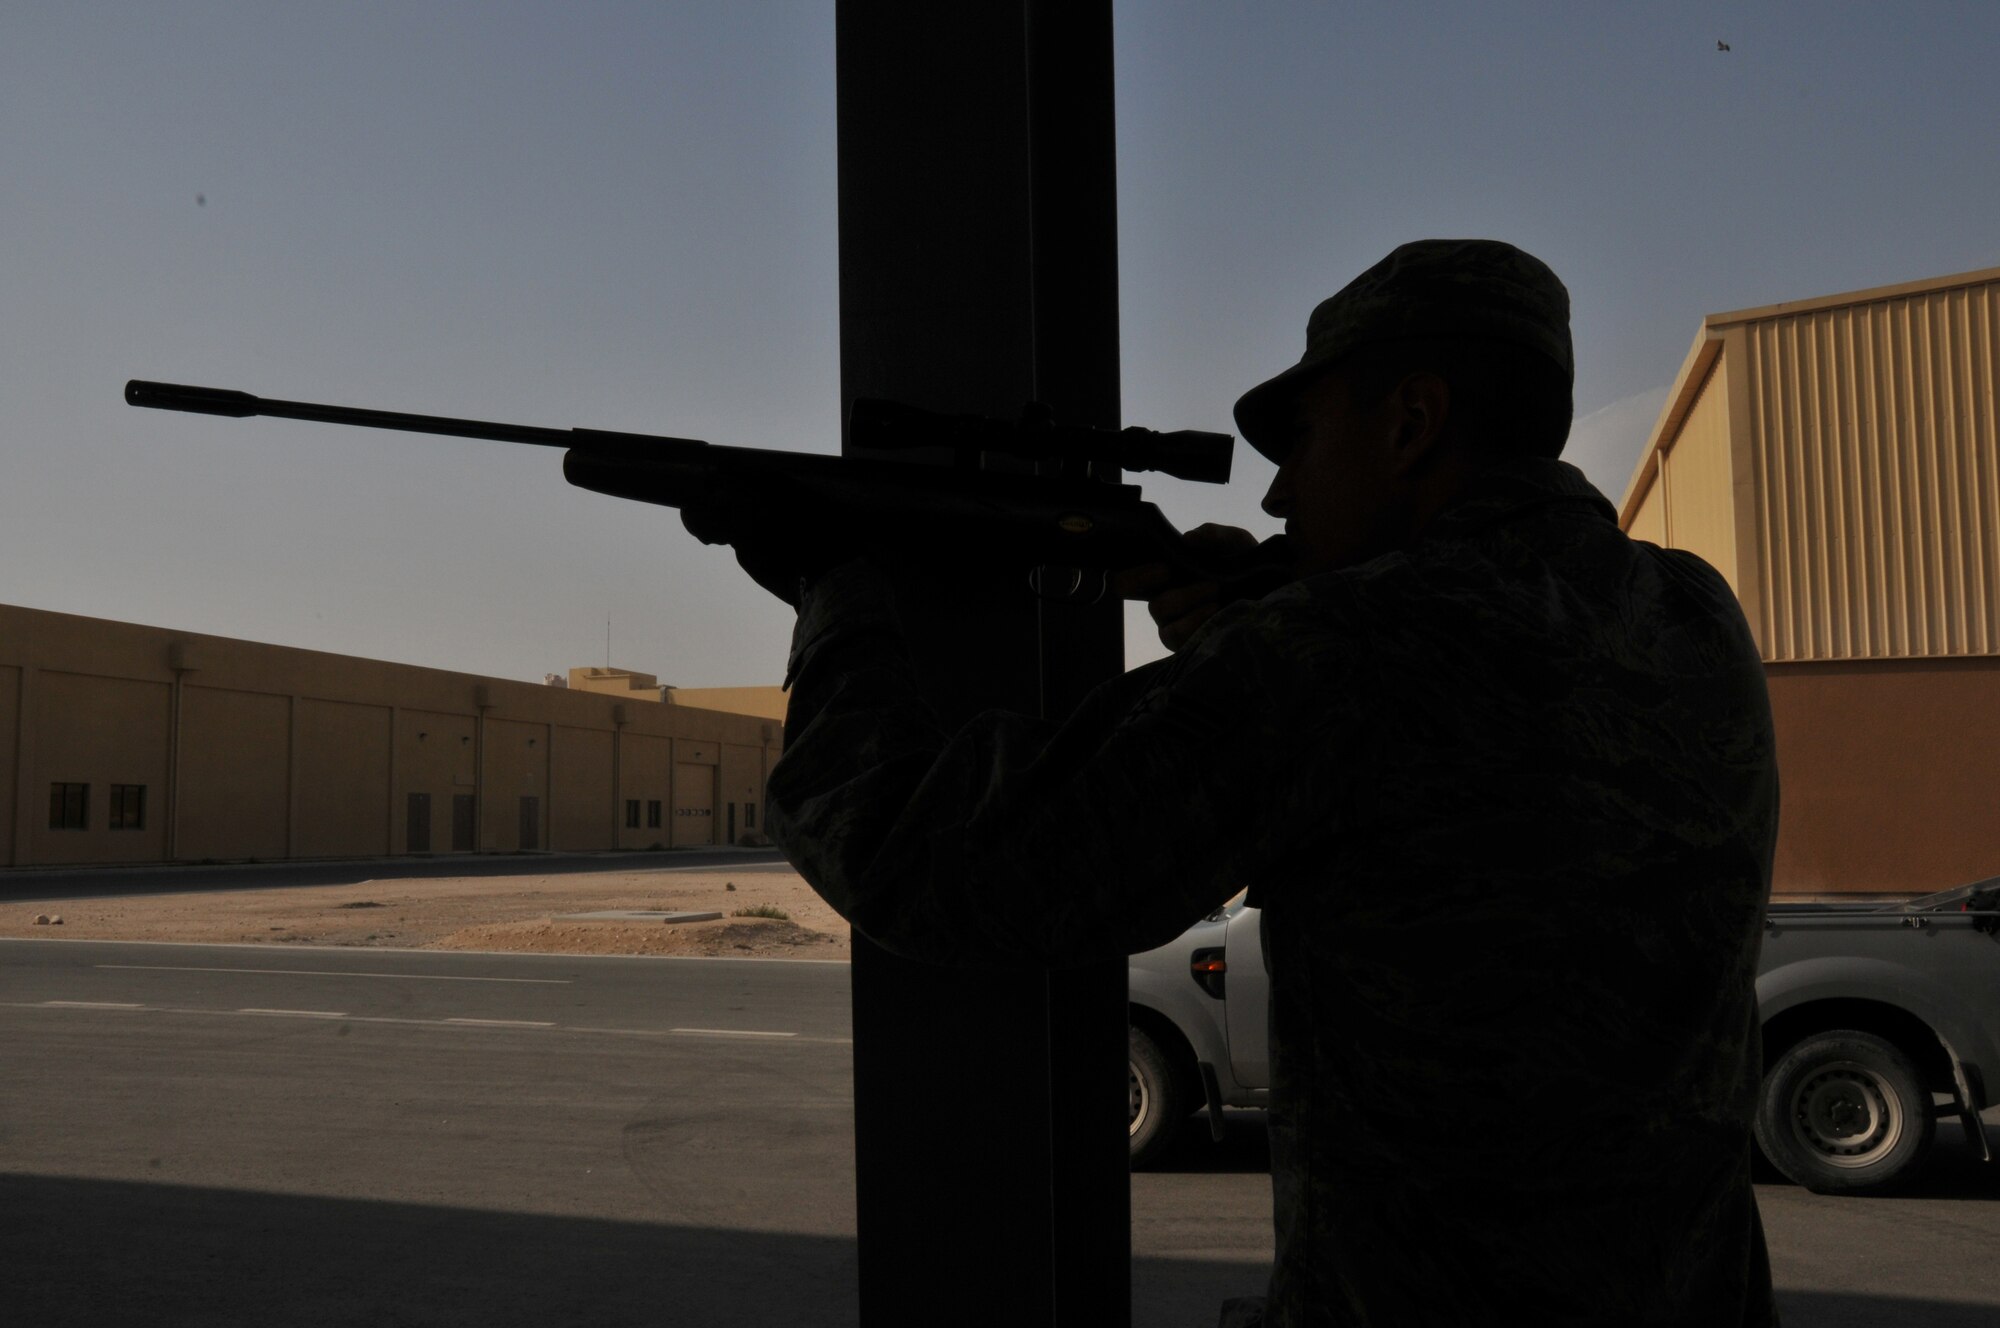 Senior Airman Jonathan McDonald, 379th Expeditionary Civil Engineer Squadron pest management technician, prevents potential damage to aircraft by bird depredation Feb. 8 at Al Udeid Air Base, Qatar. Bird strikes in 2015 cost $8,430 in aircraft repairs. (U.S. Air Force photo by Tech. Sgt. Terrica Y. Jones/Released) 